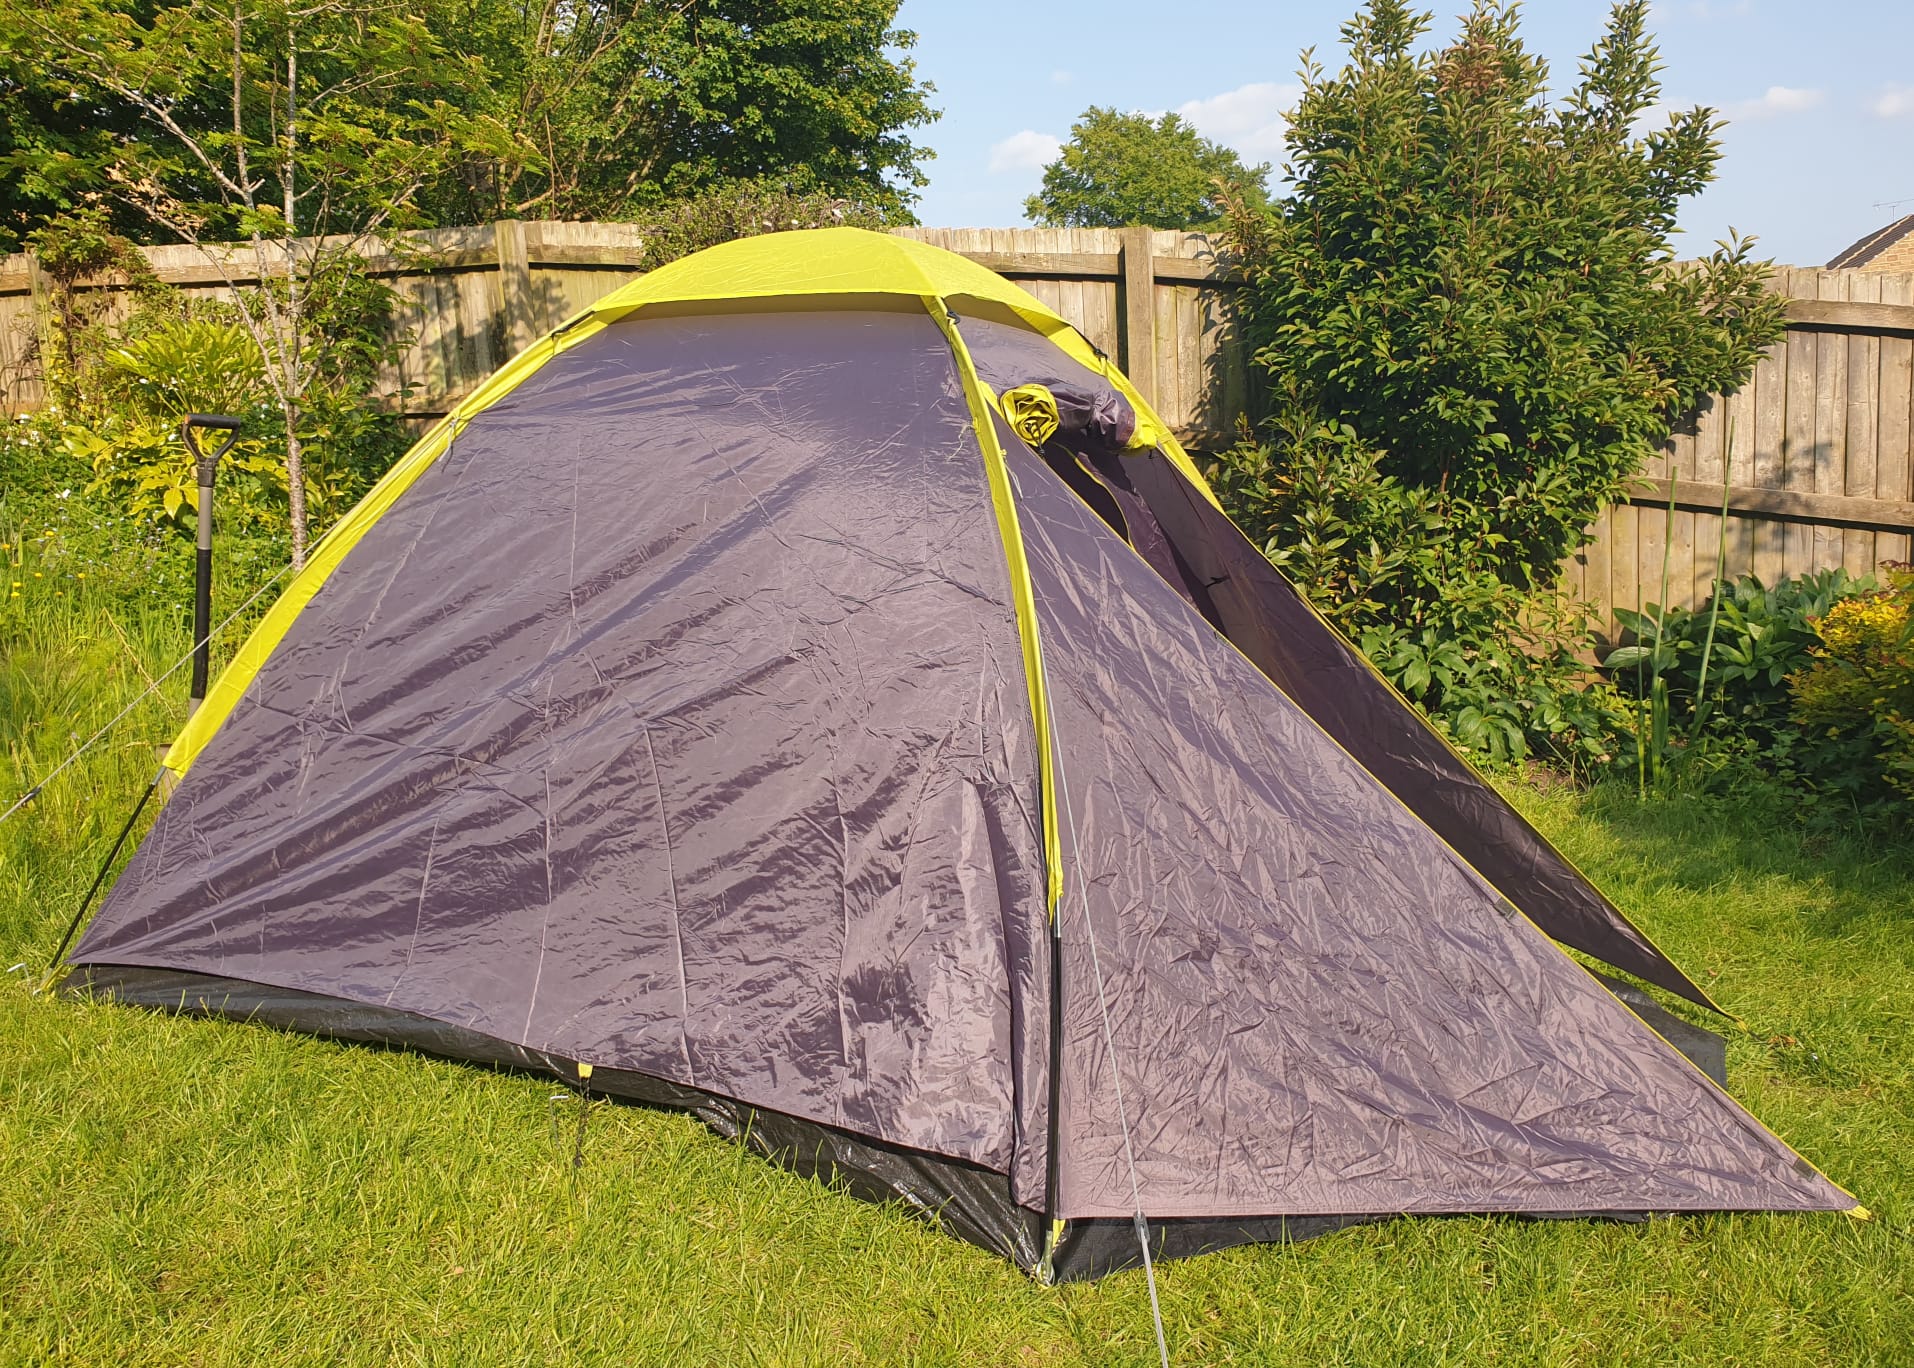 Tent (4 person) - ISR00011